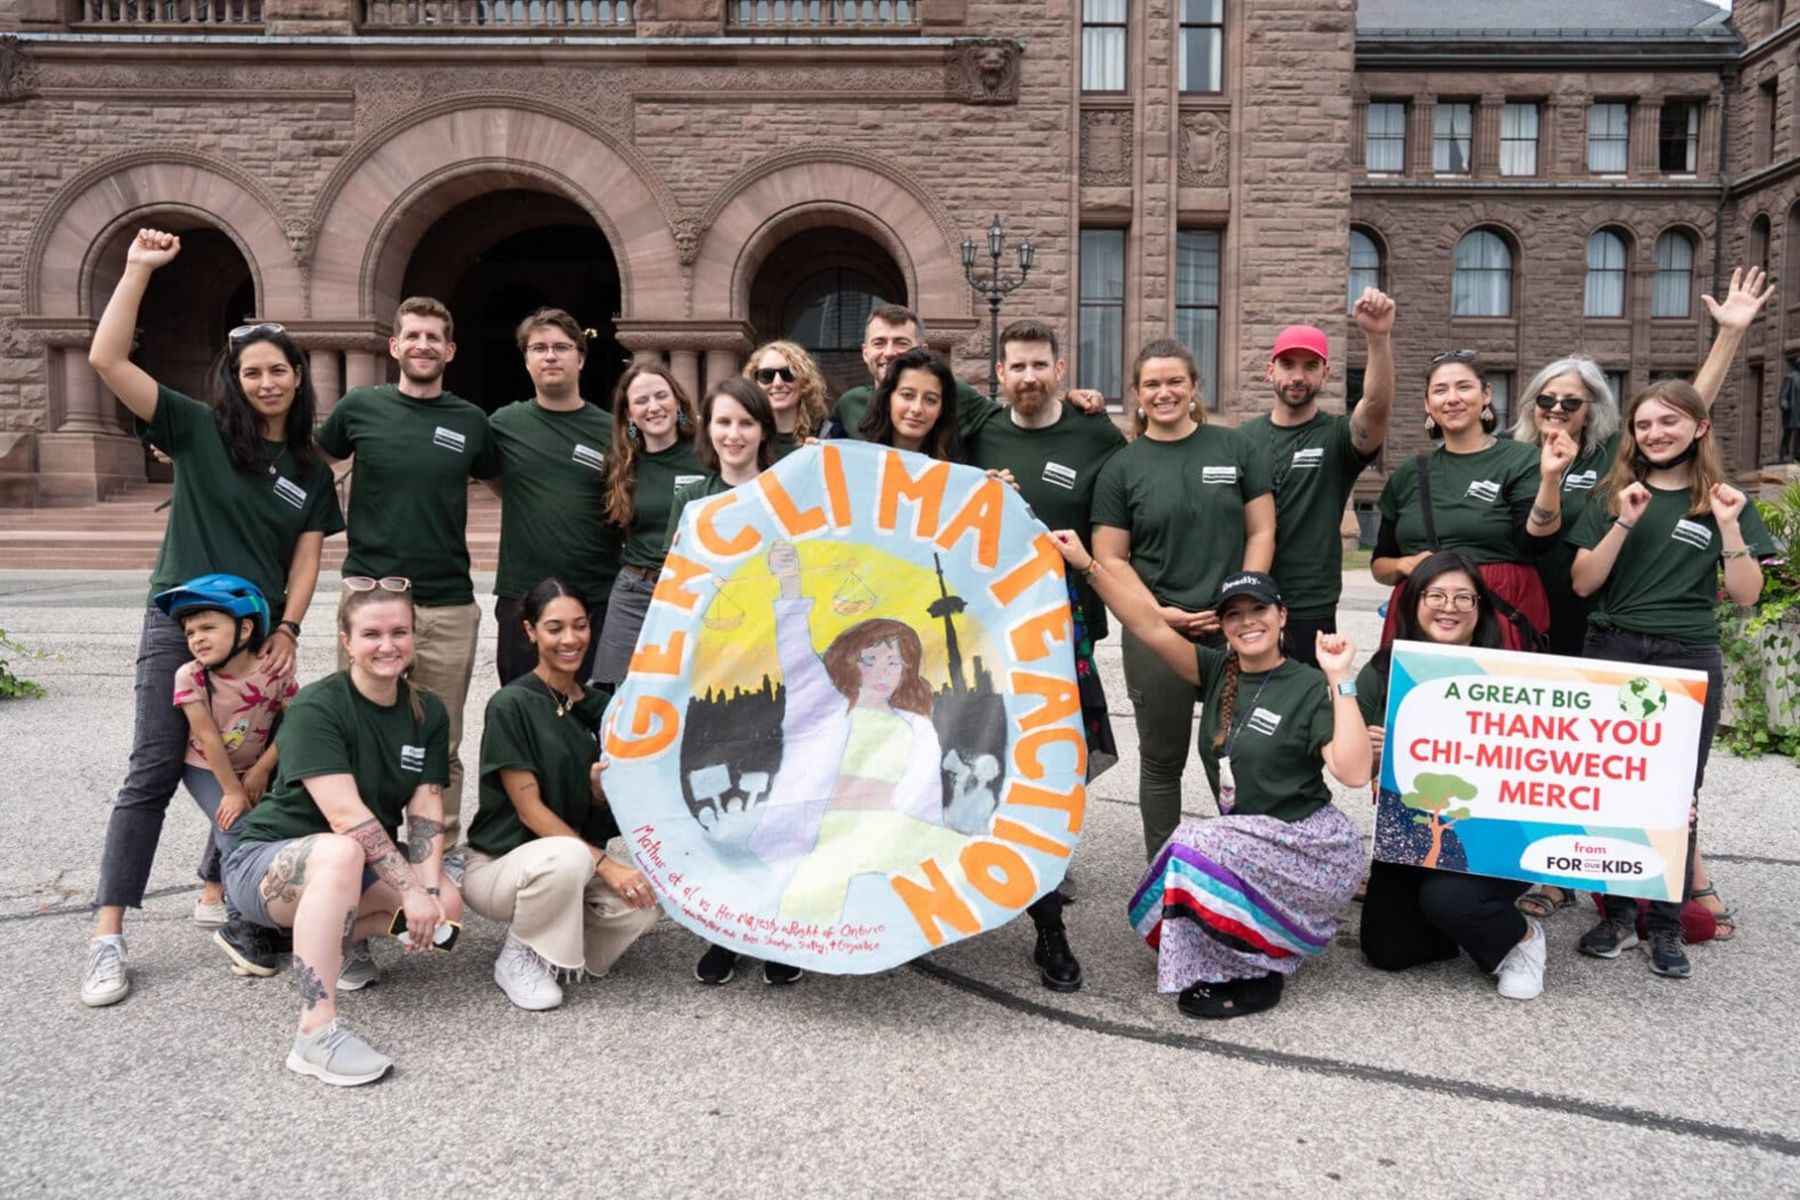 A group of young people stand together holding a large round sign that says Gen Climate Action outside Queen’s Park in Toronto. They are wearing dark green t-shirts. Some are standing with their arms raised, some are kneeling. A second signs says, “A great big thank you.”